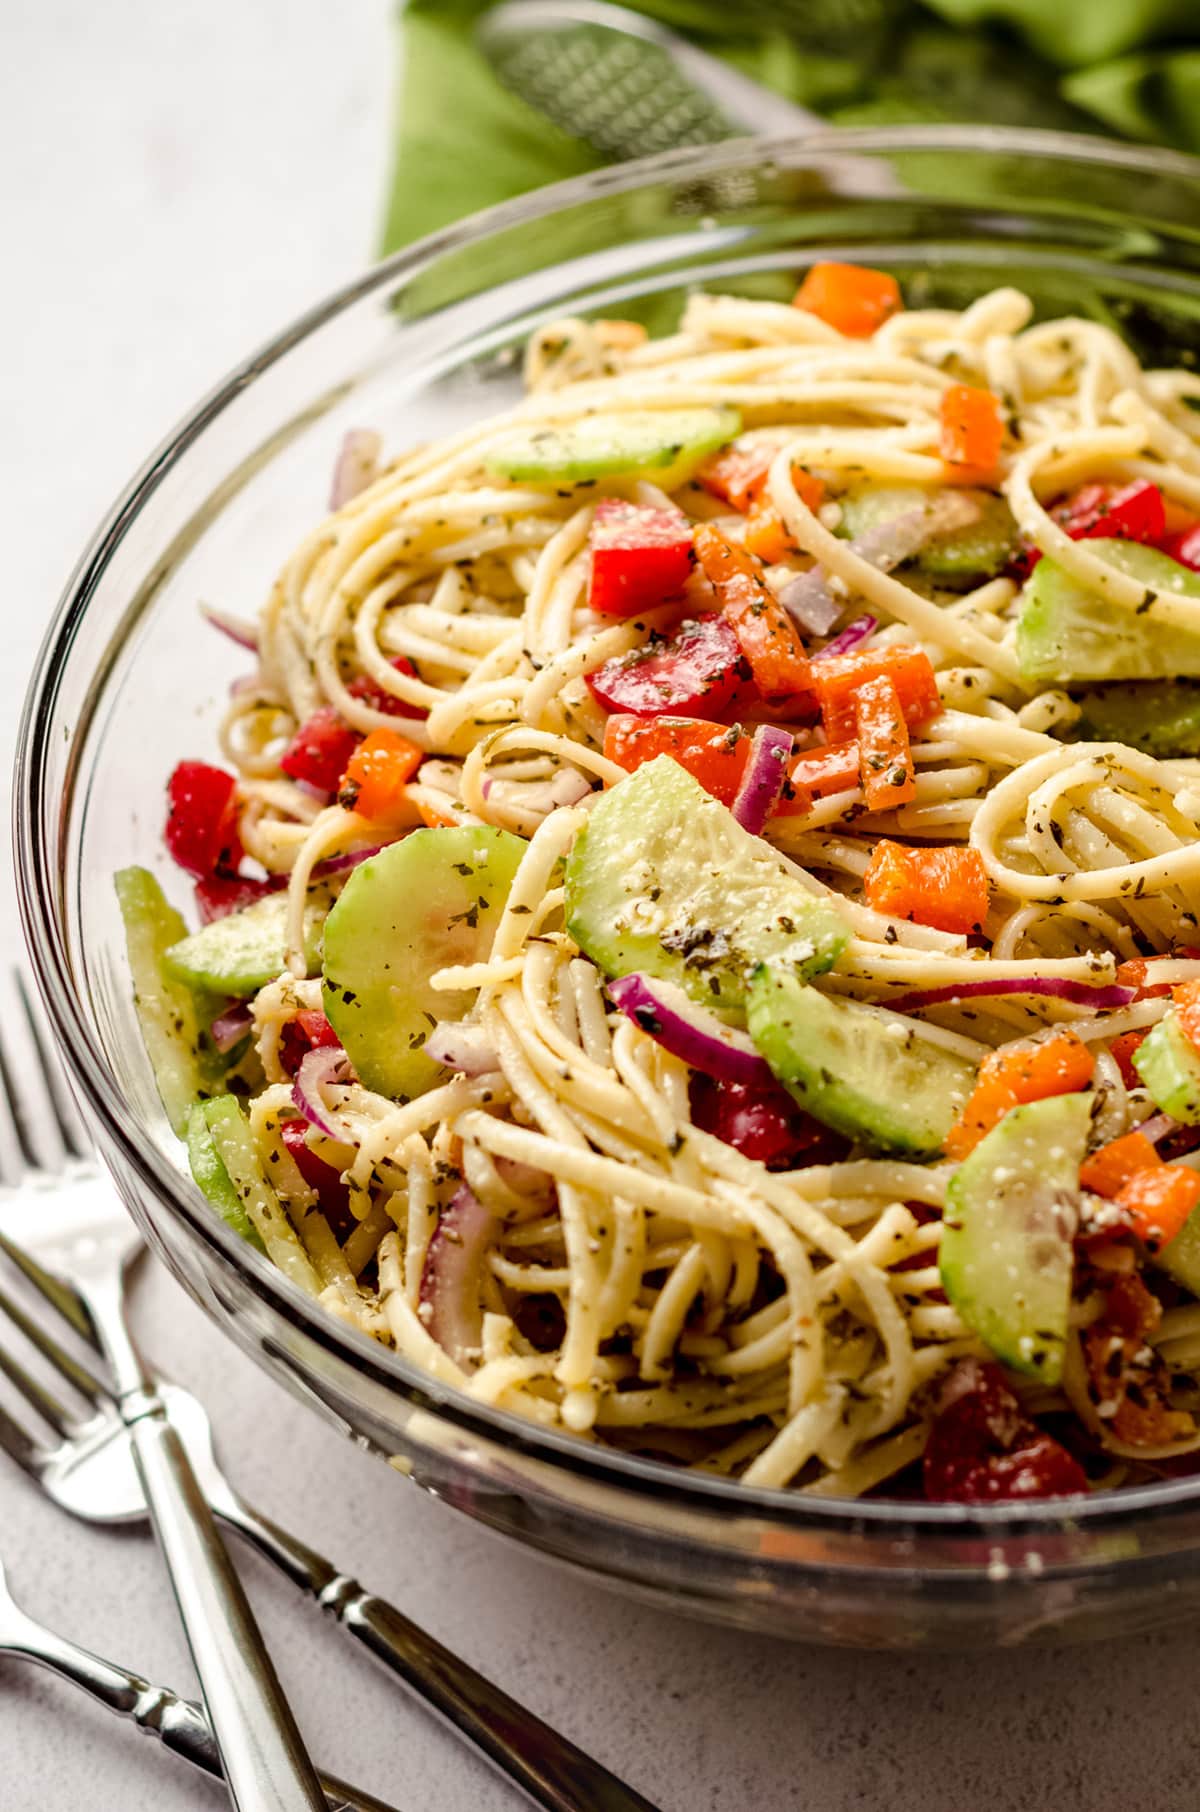 A close up of a serving bowl full of cold pasta salad with veggies.